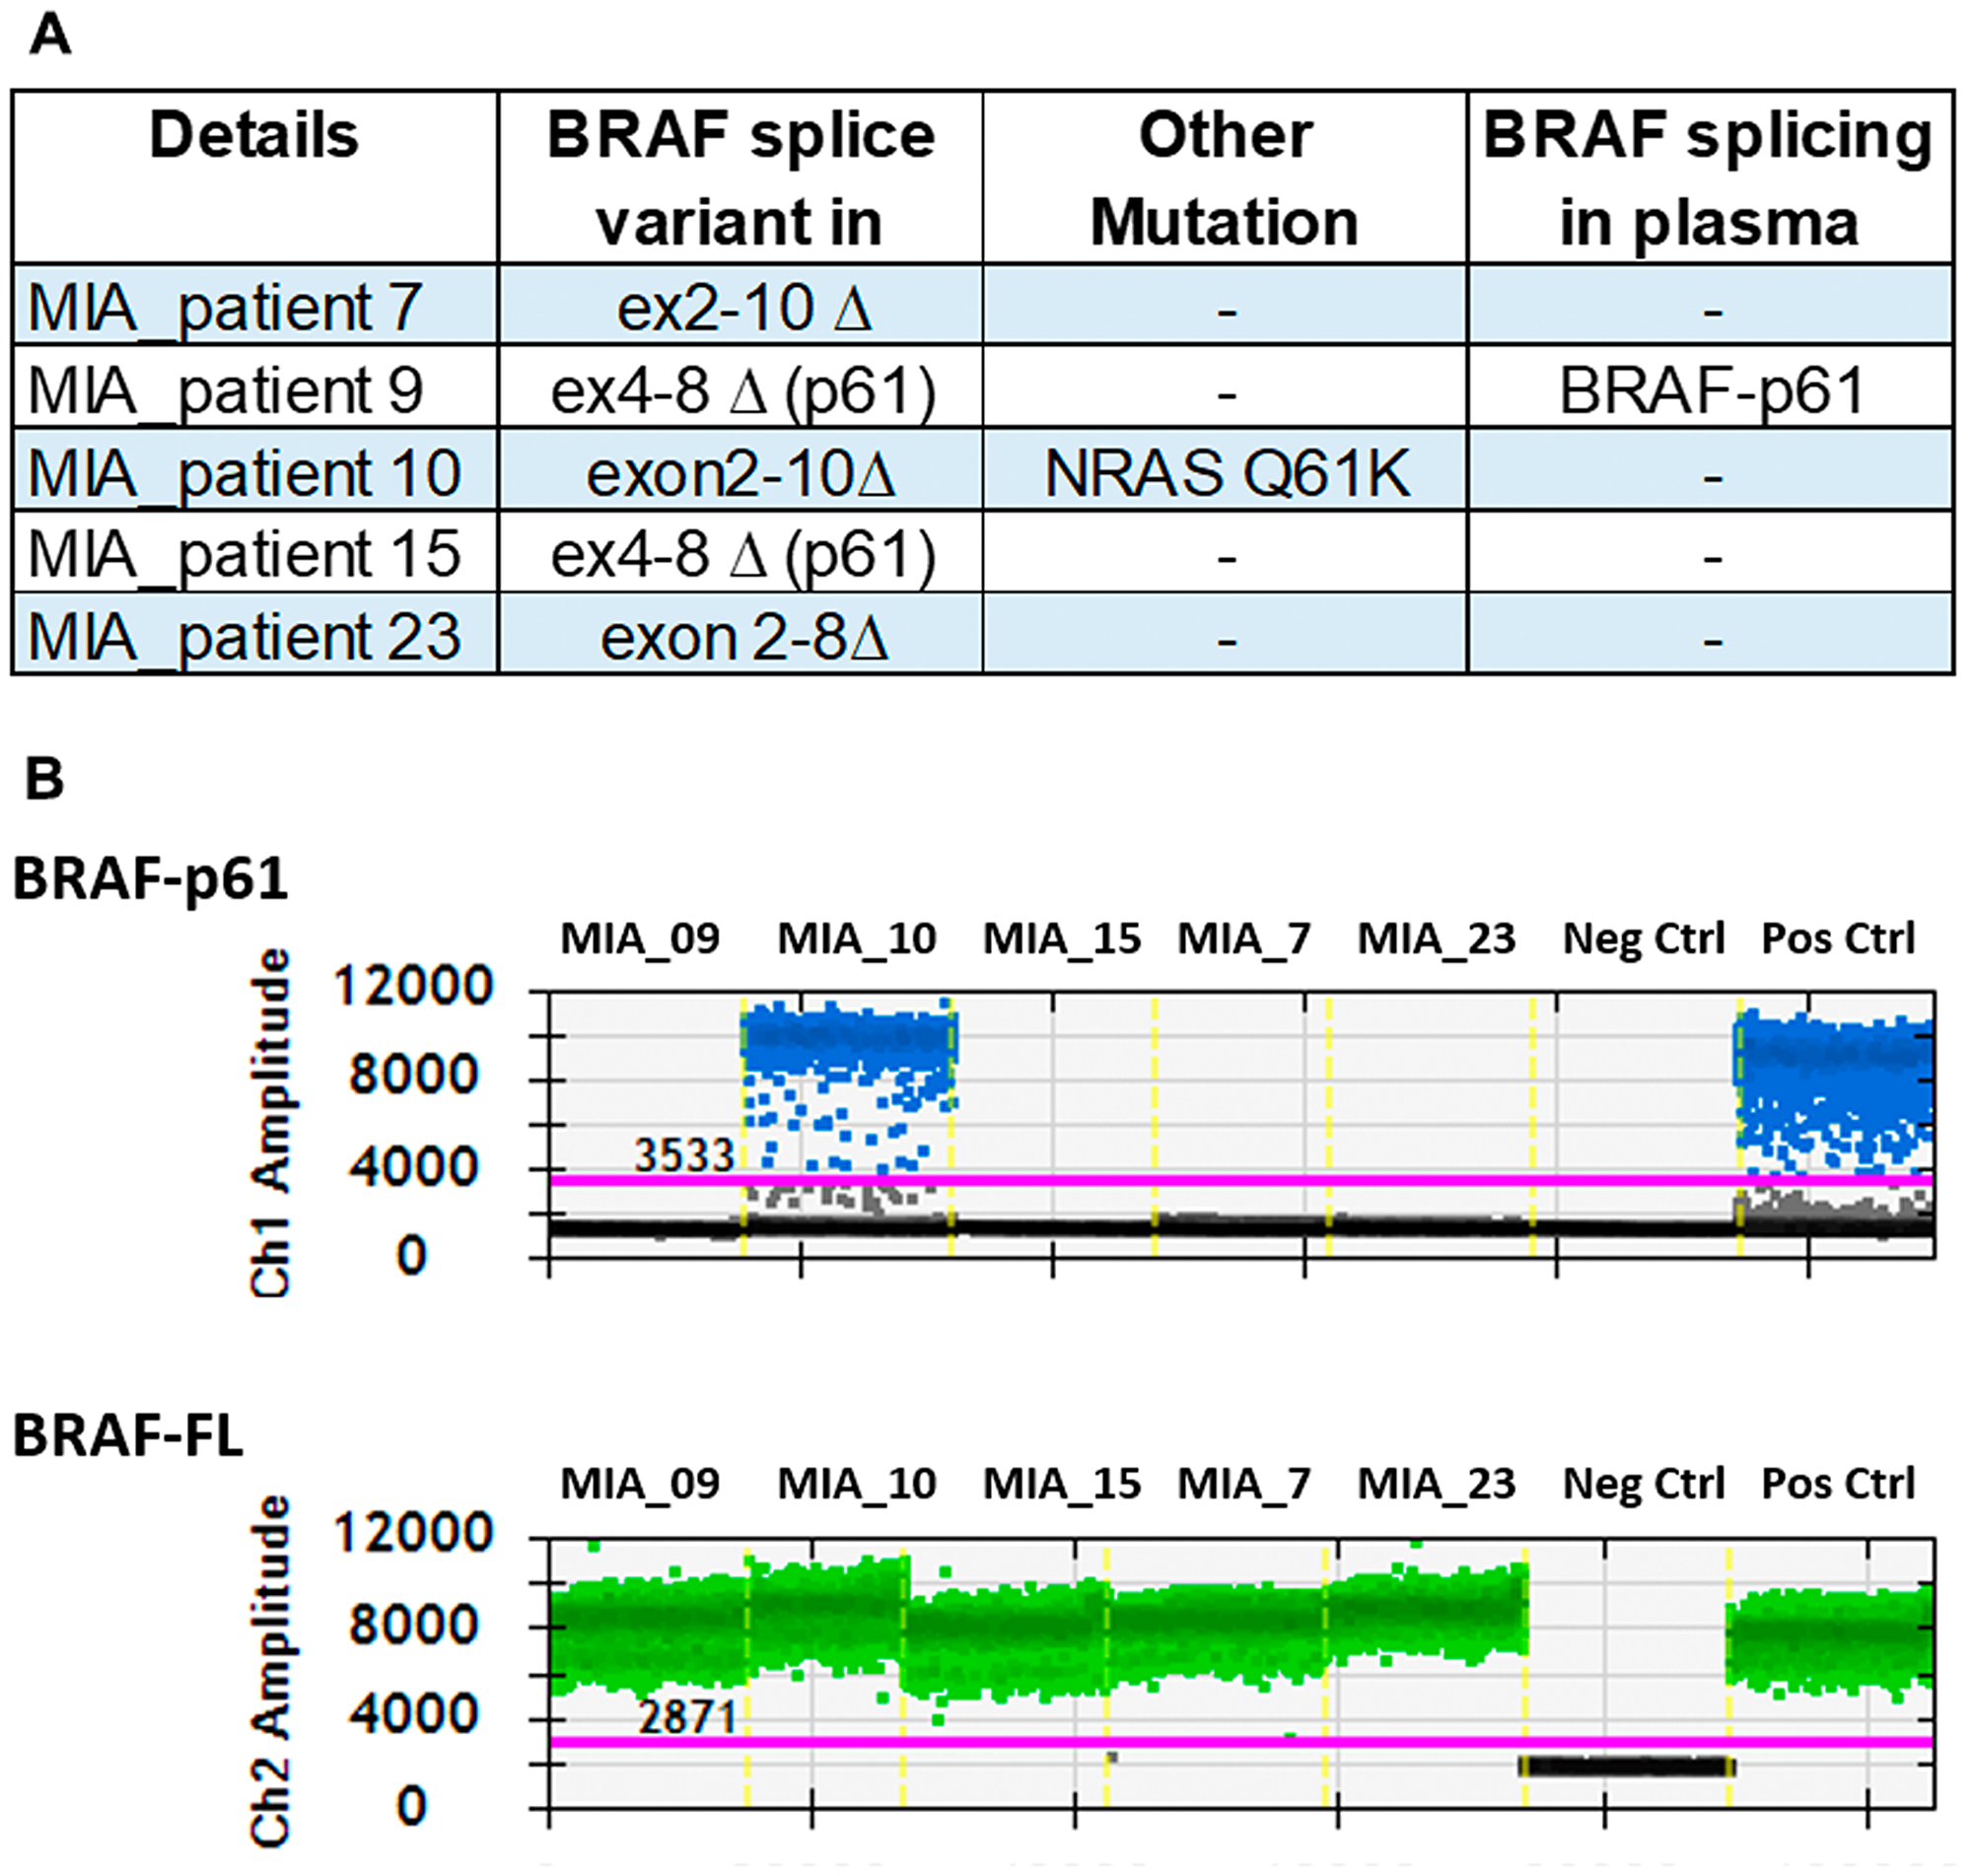 Detection of BRAF splice variants in patients known to have the splice variant.